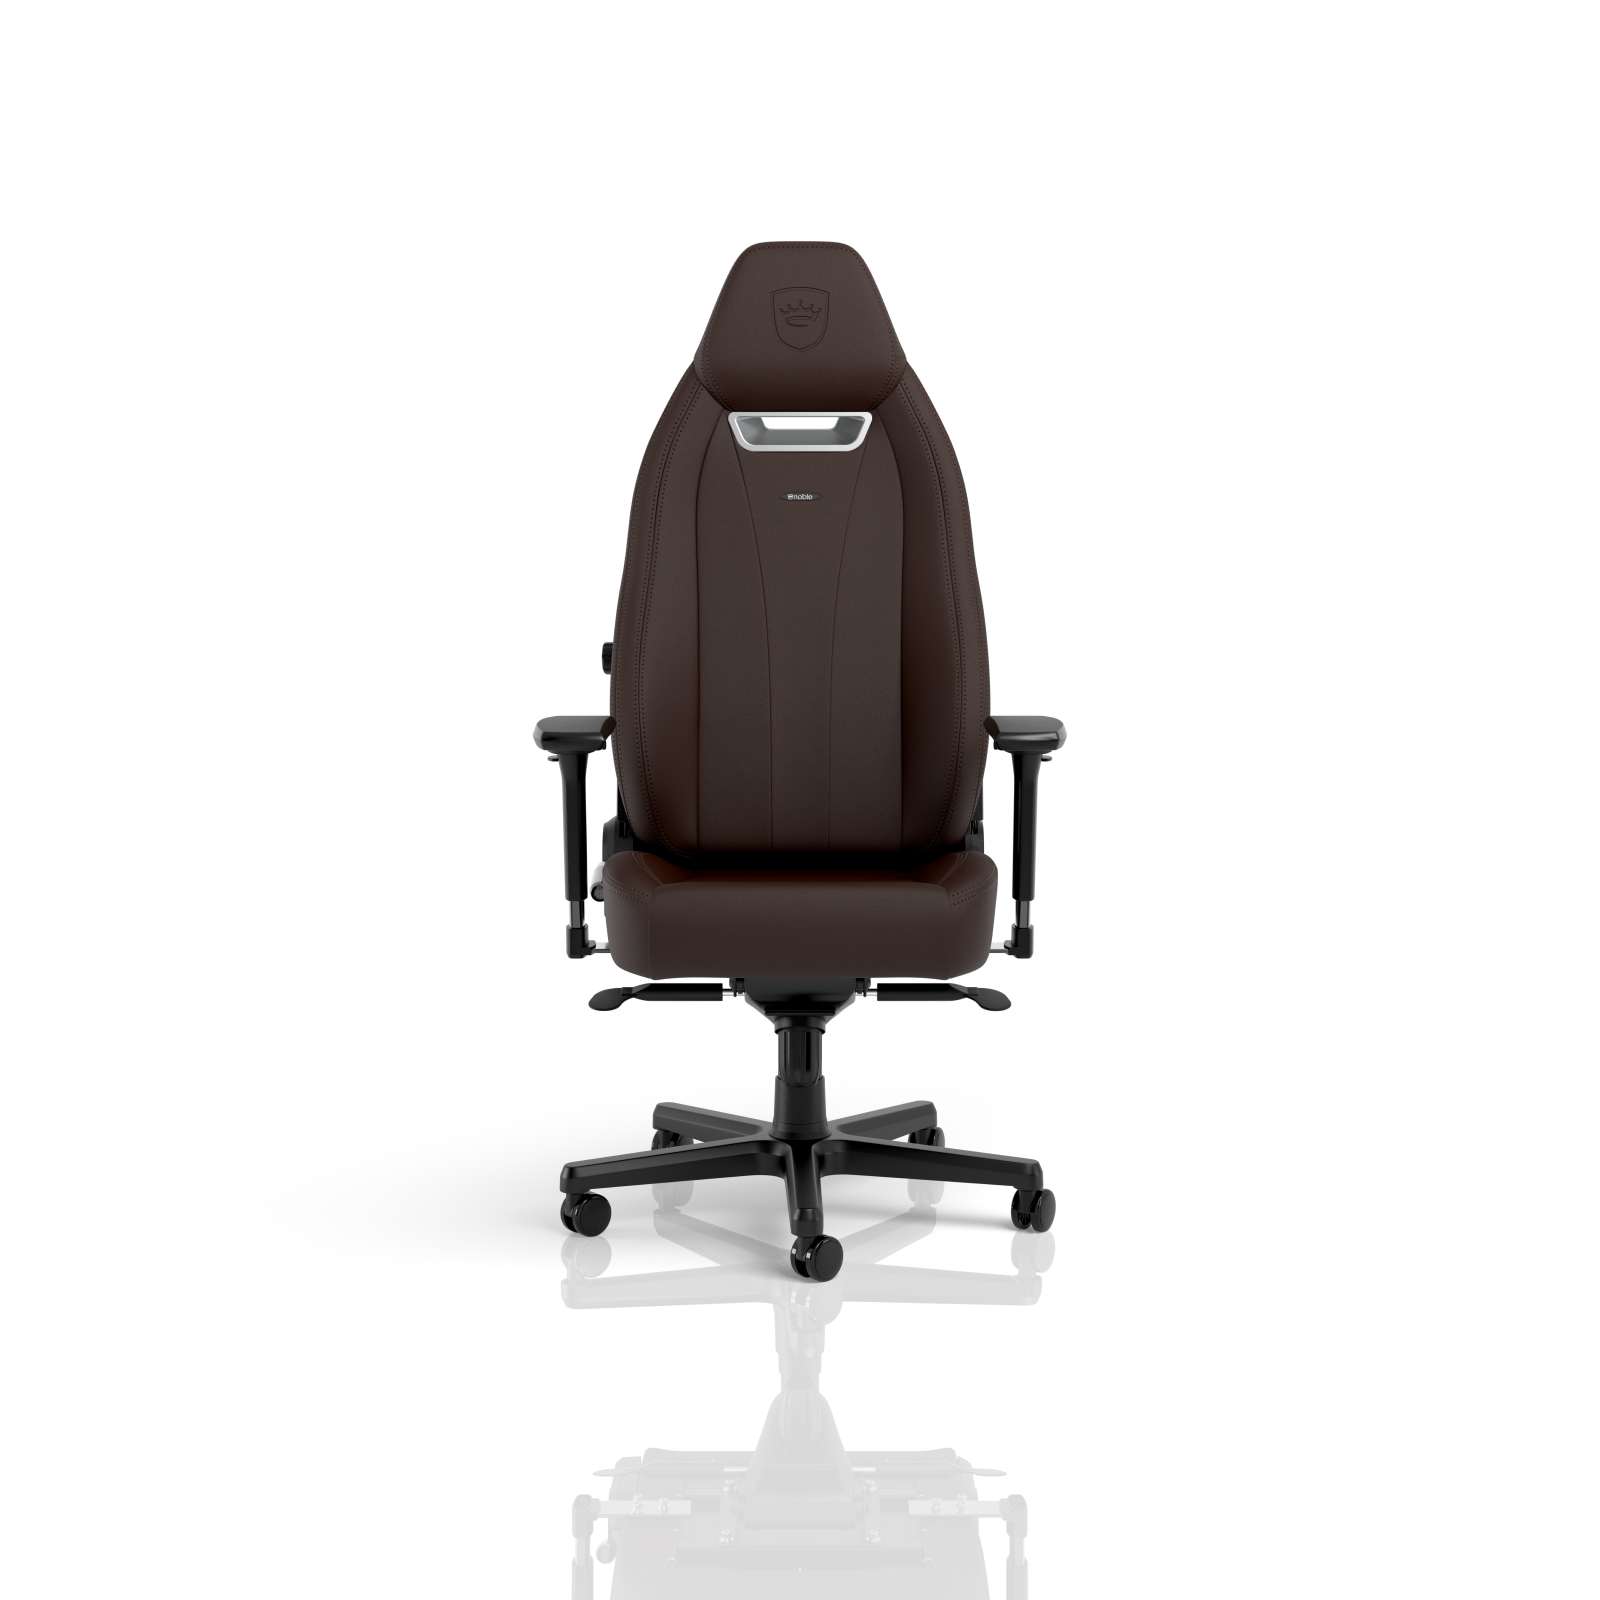 noblechairs LEGEND Gaming Chair Java Edition